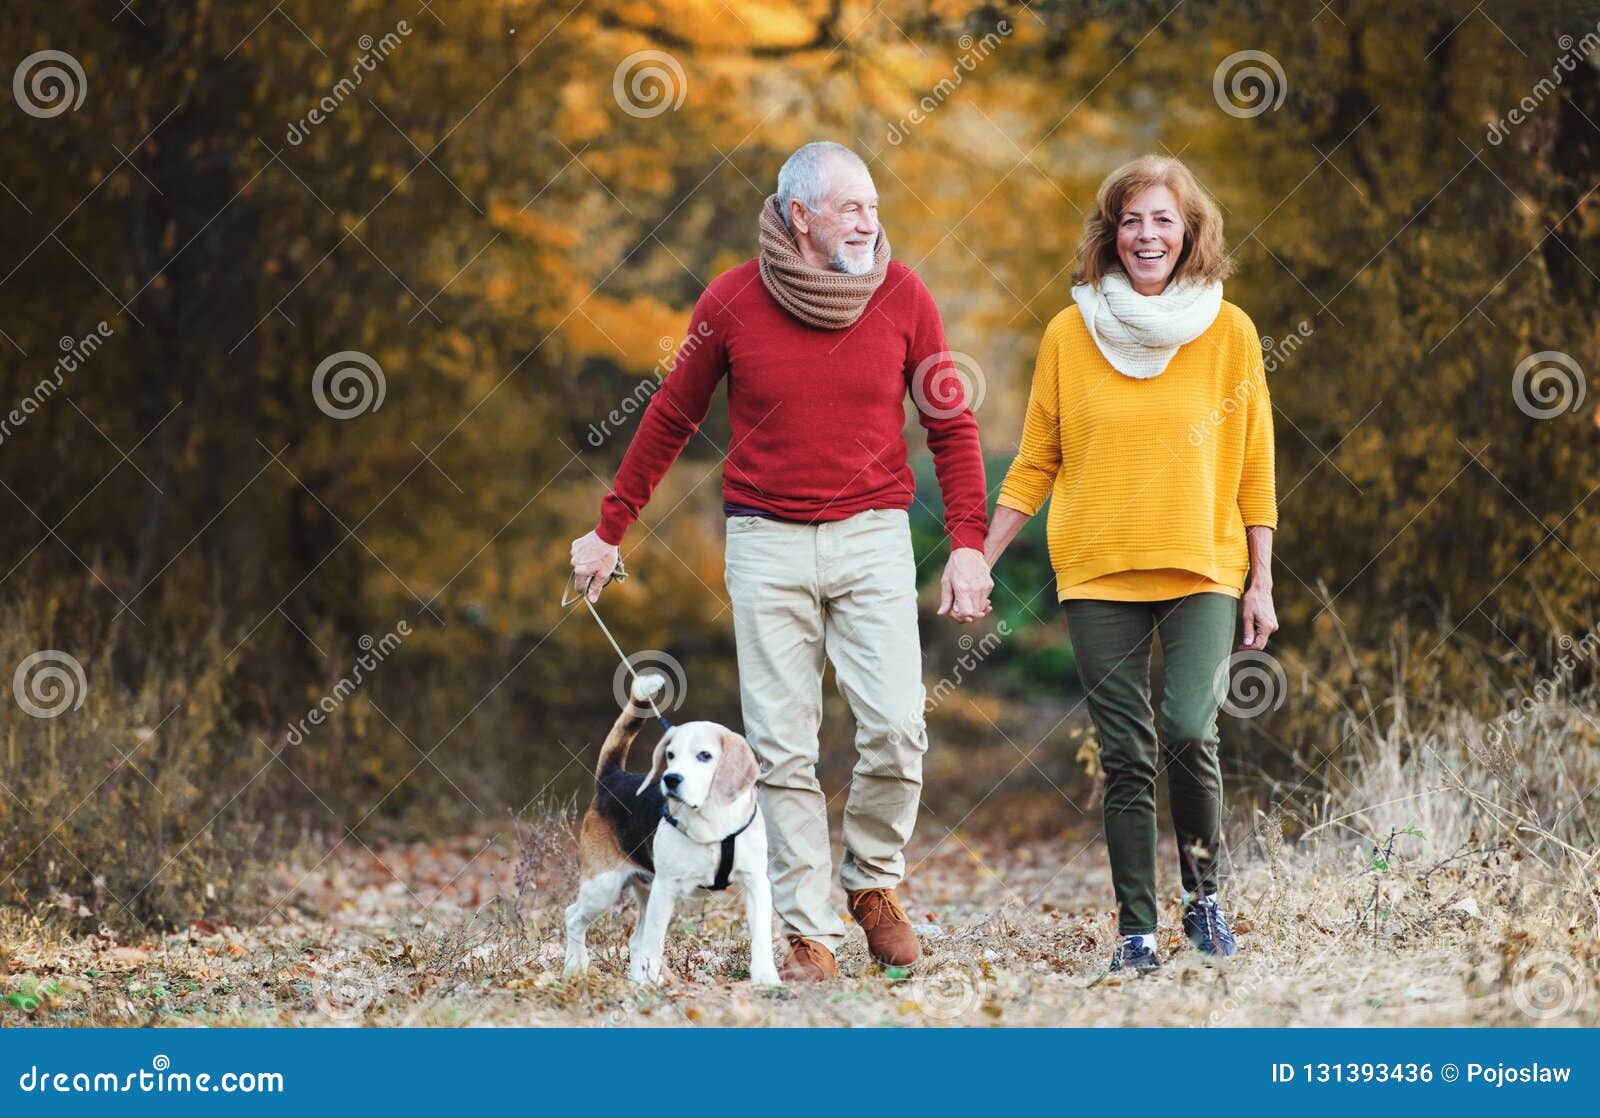 a senior couple with a dog on a walk in an autumn nature.